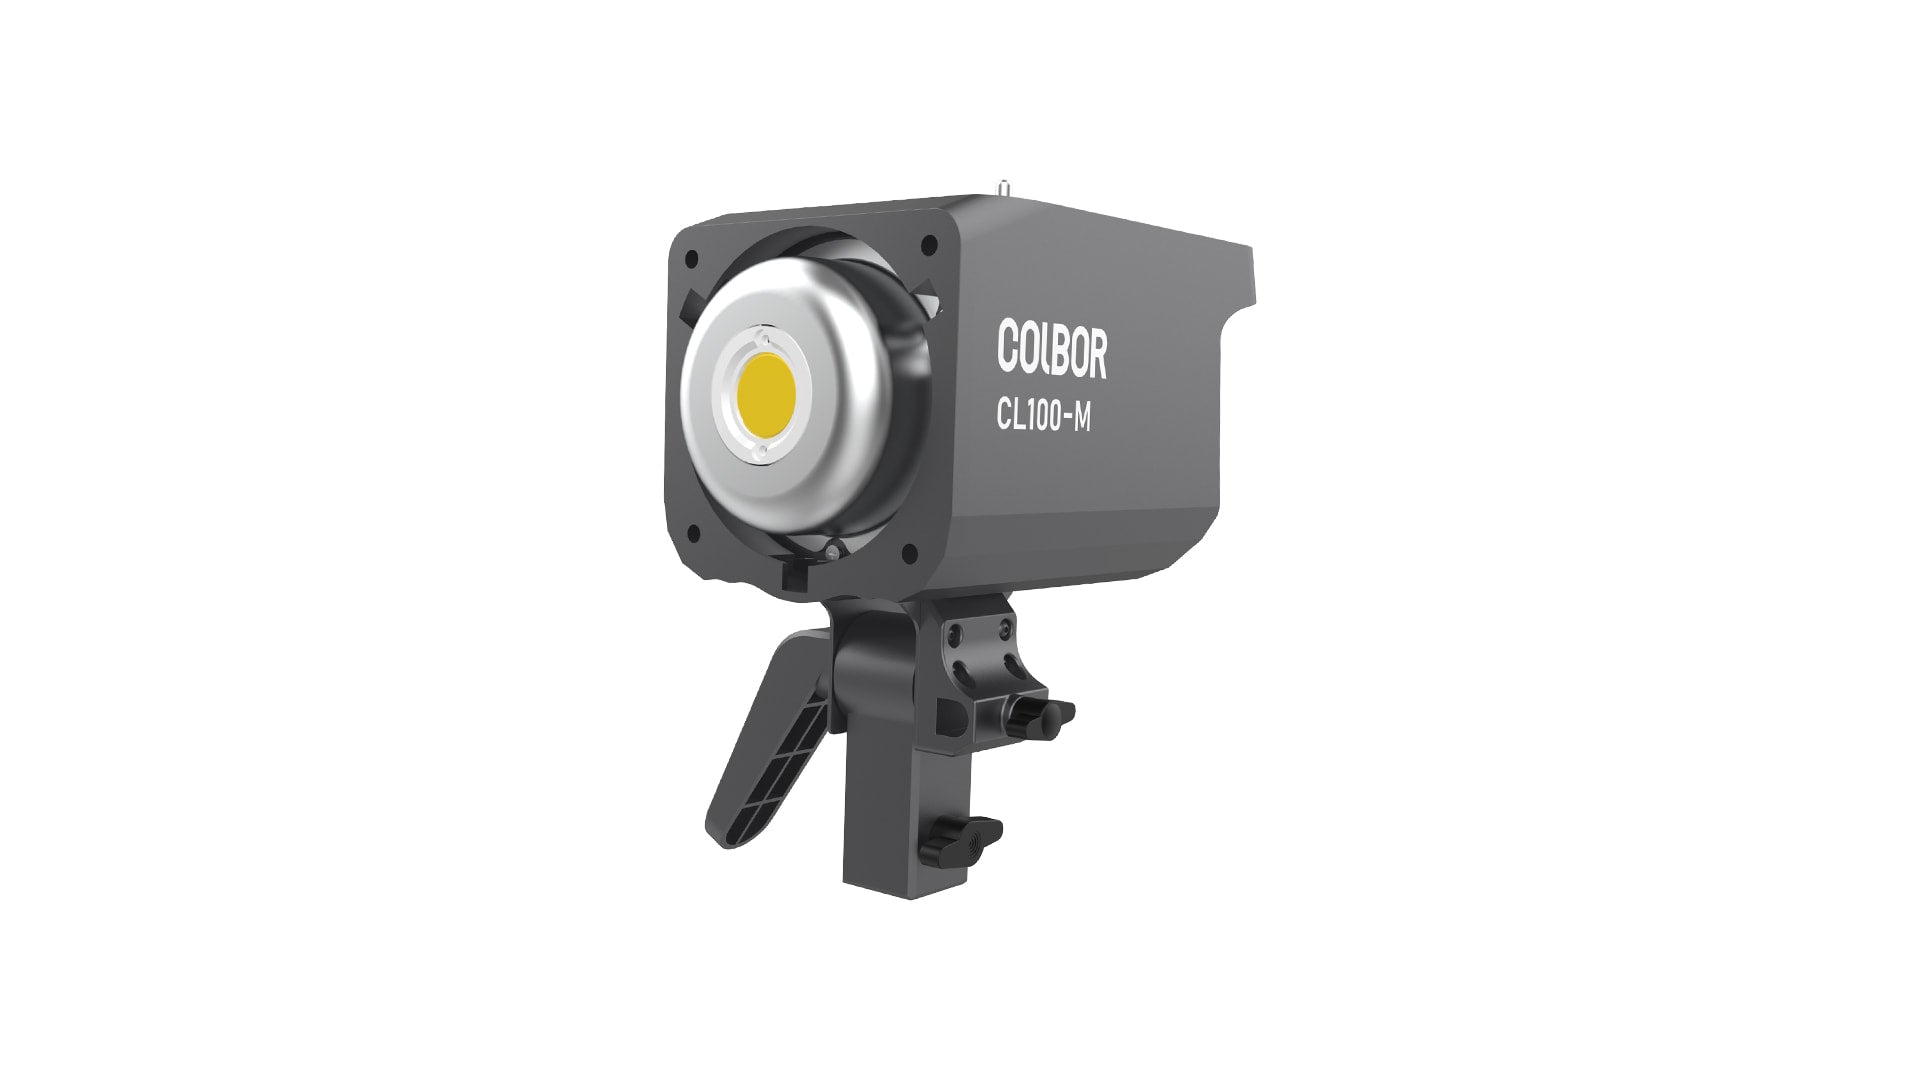 COLBOR CL100M studio lighting for product photography is at the daylight color temperature.